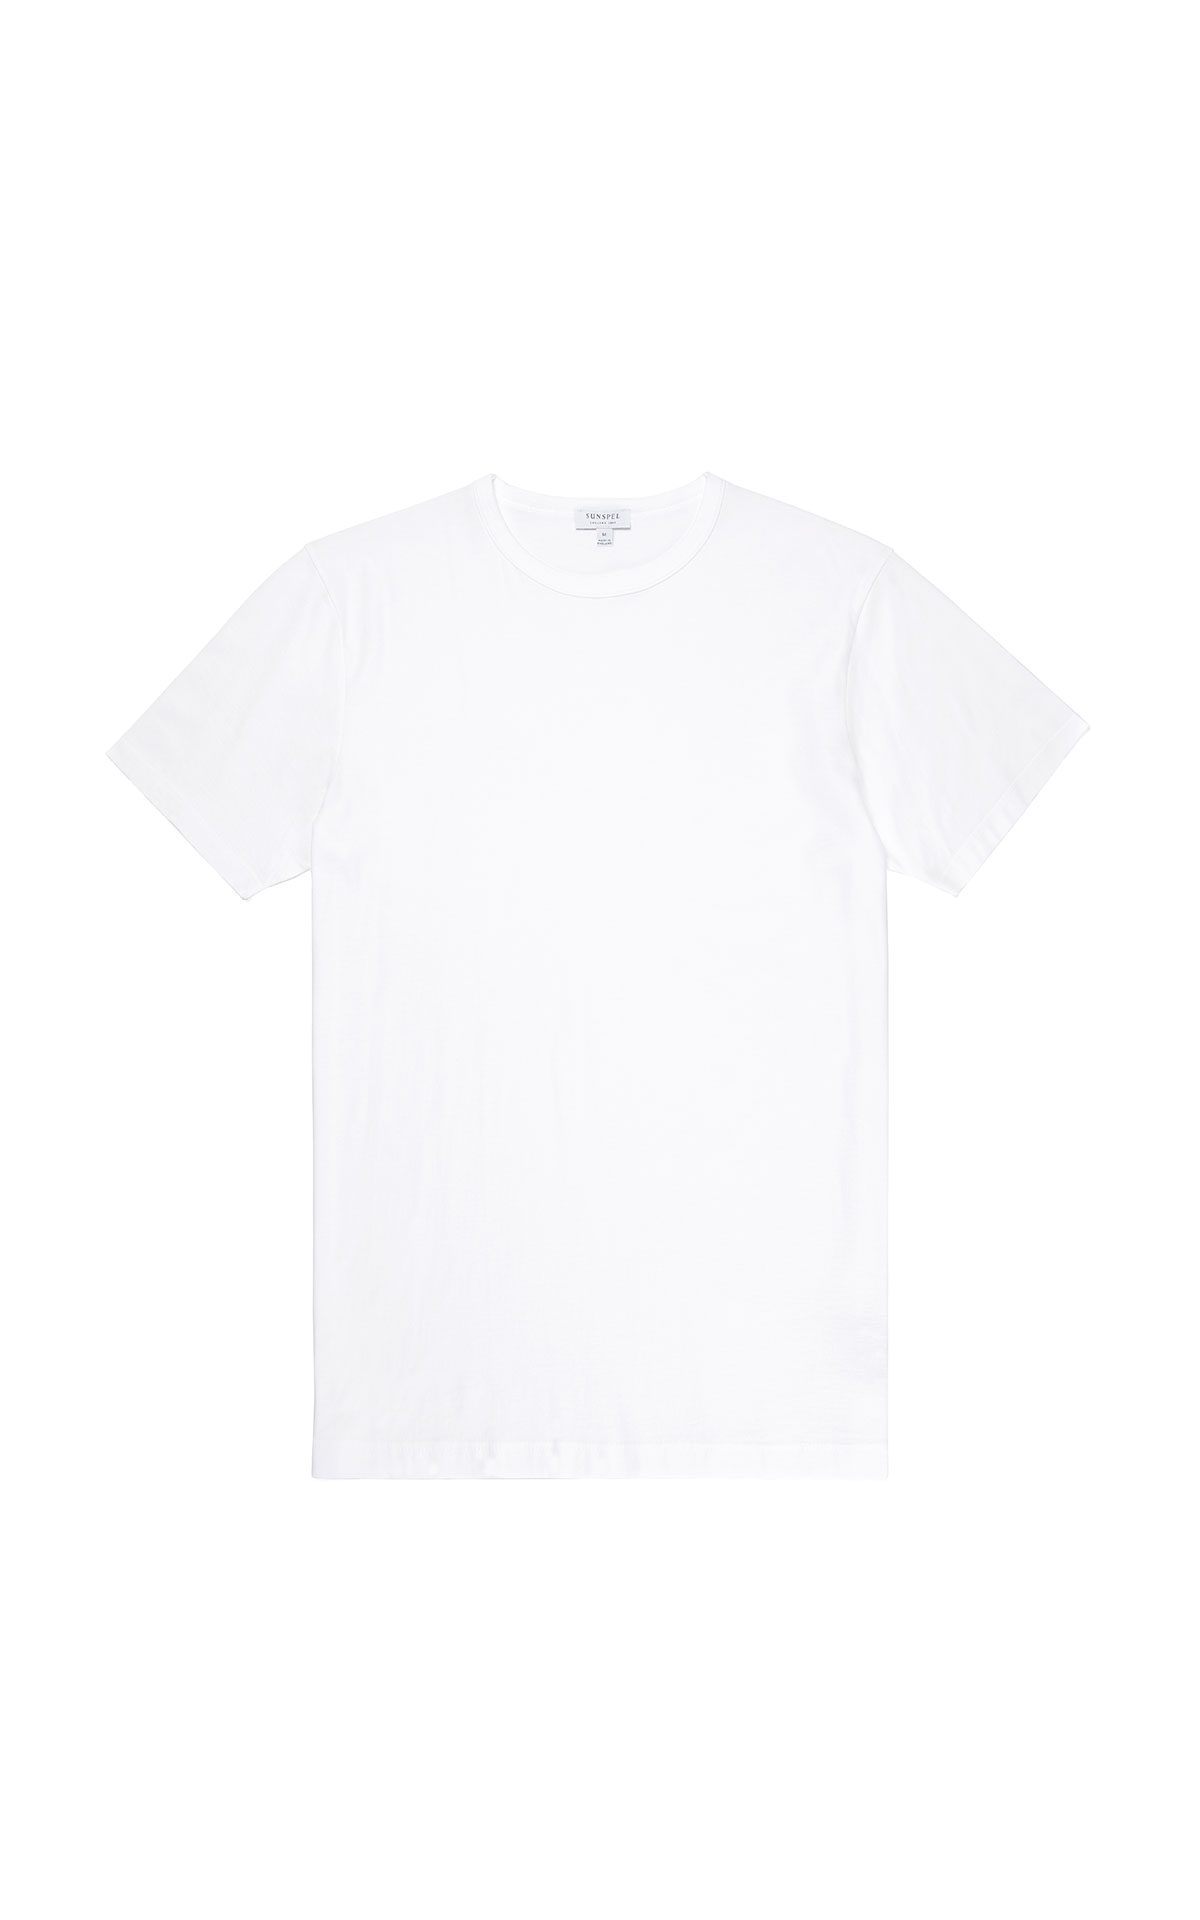 Sunspel Classic t-shirt in white from Bicester Village